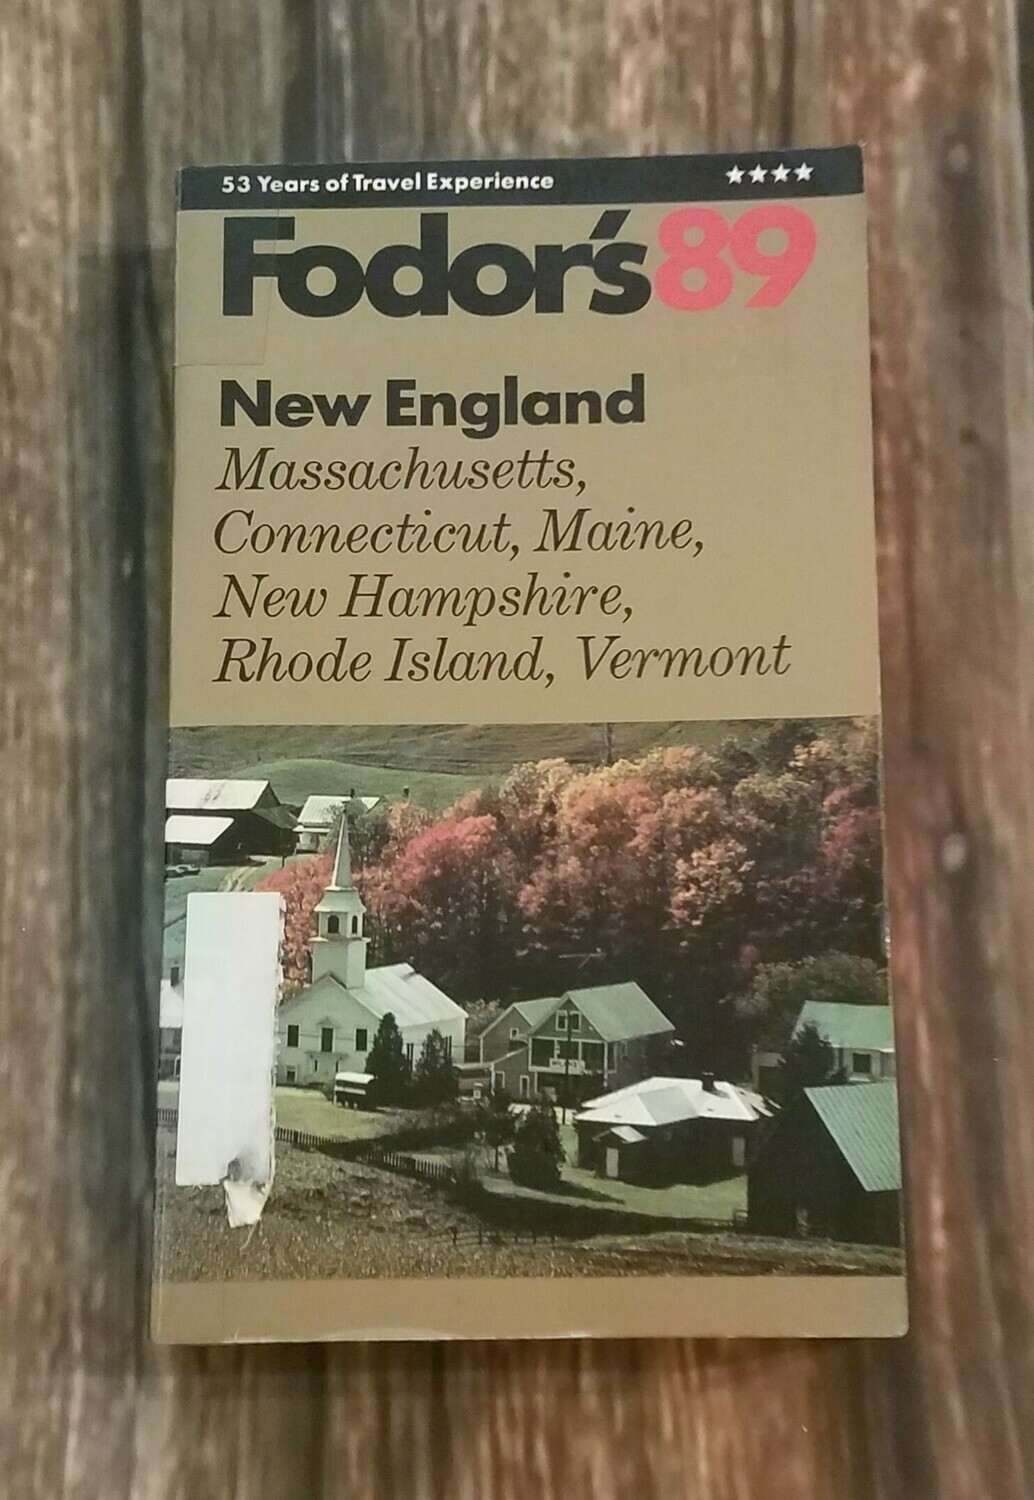 Fodor's 89 New England by Fodor's Travel Production